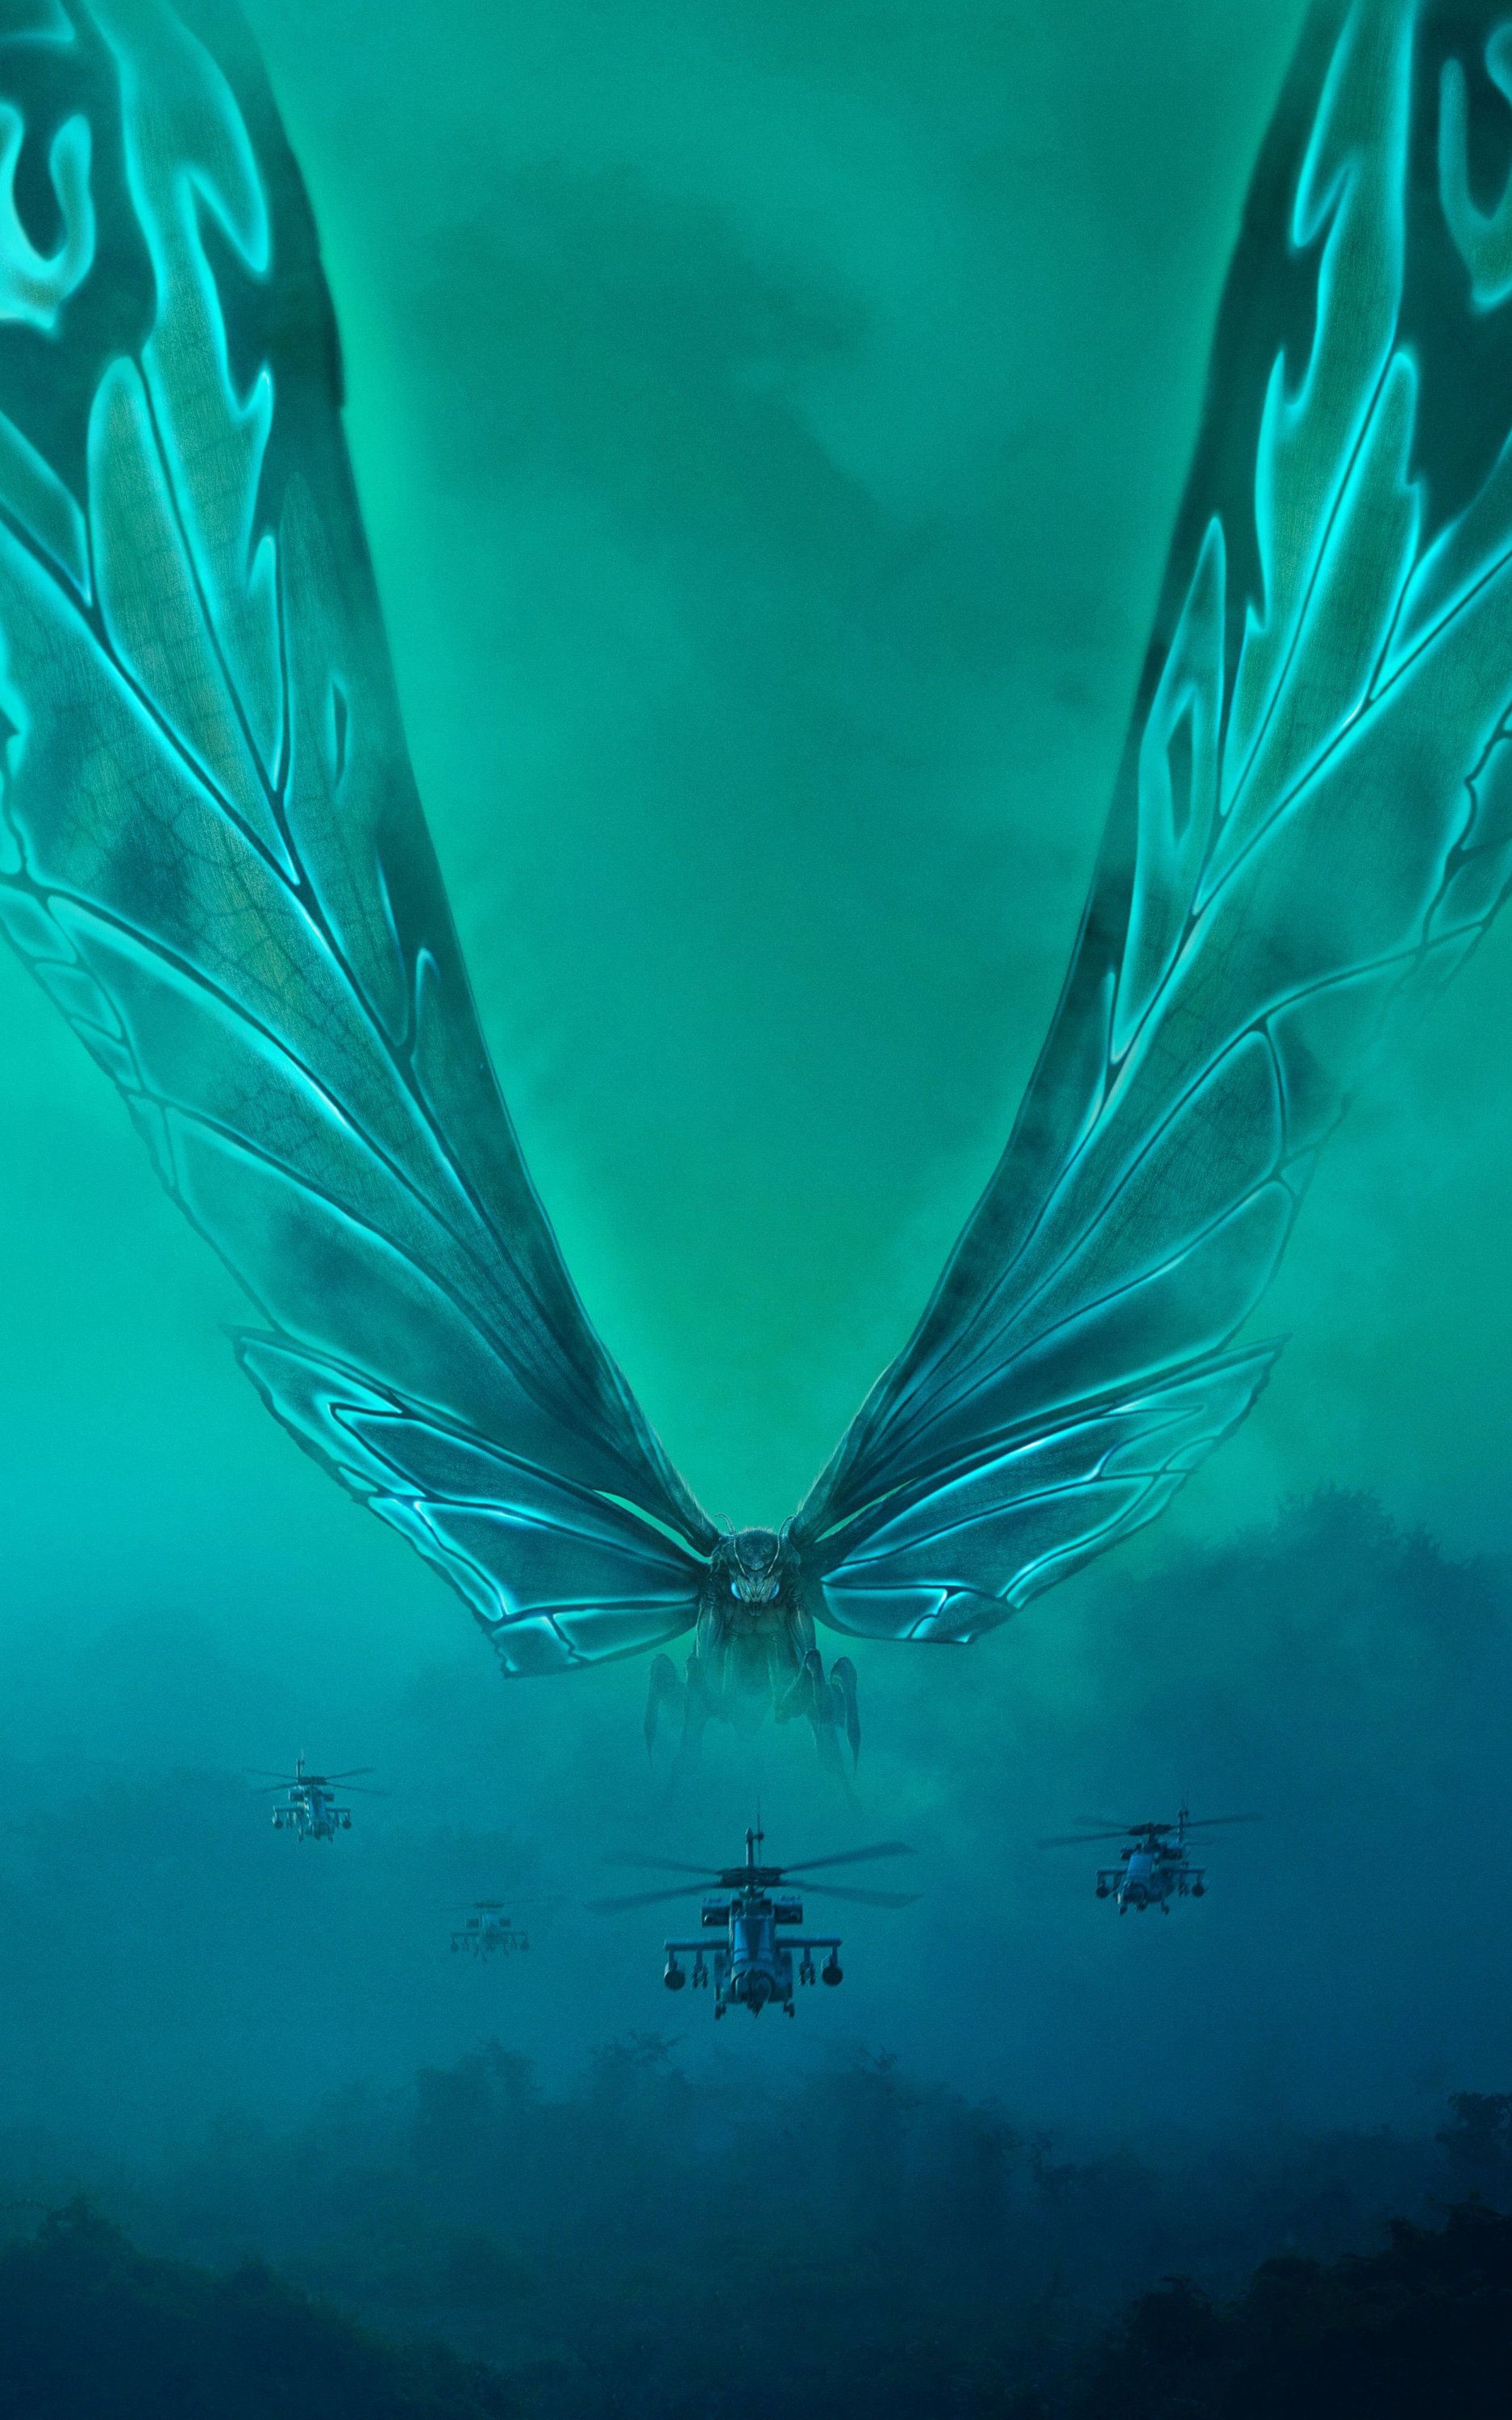 Godzilla King Of The Monsters 2019 Poster Wallpapers